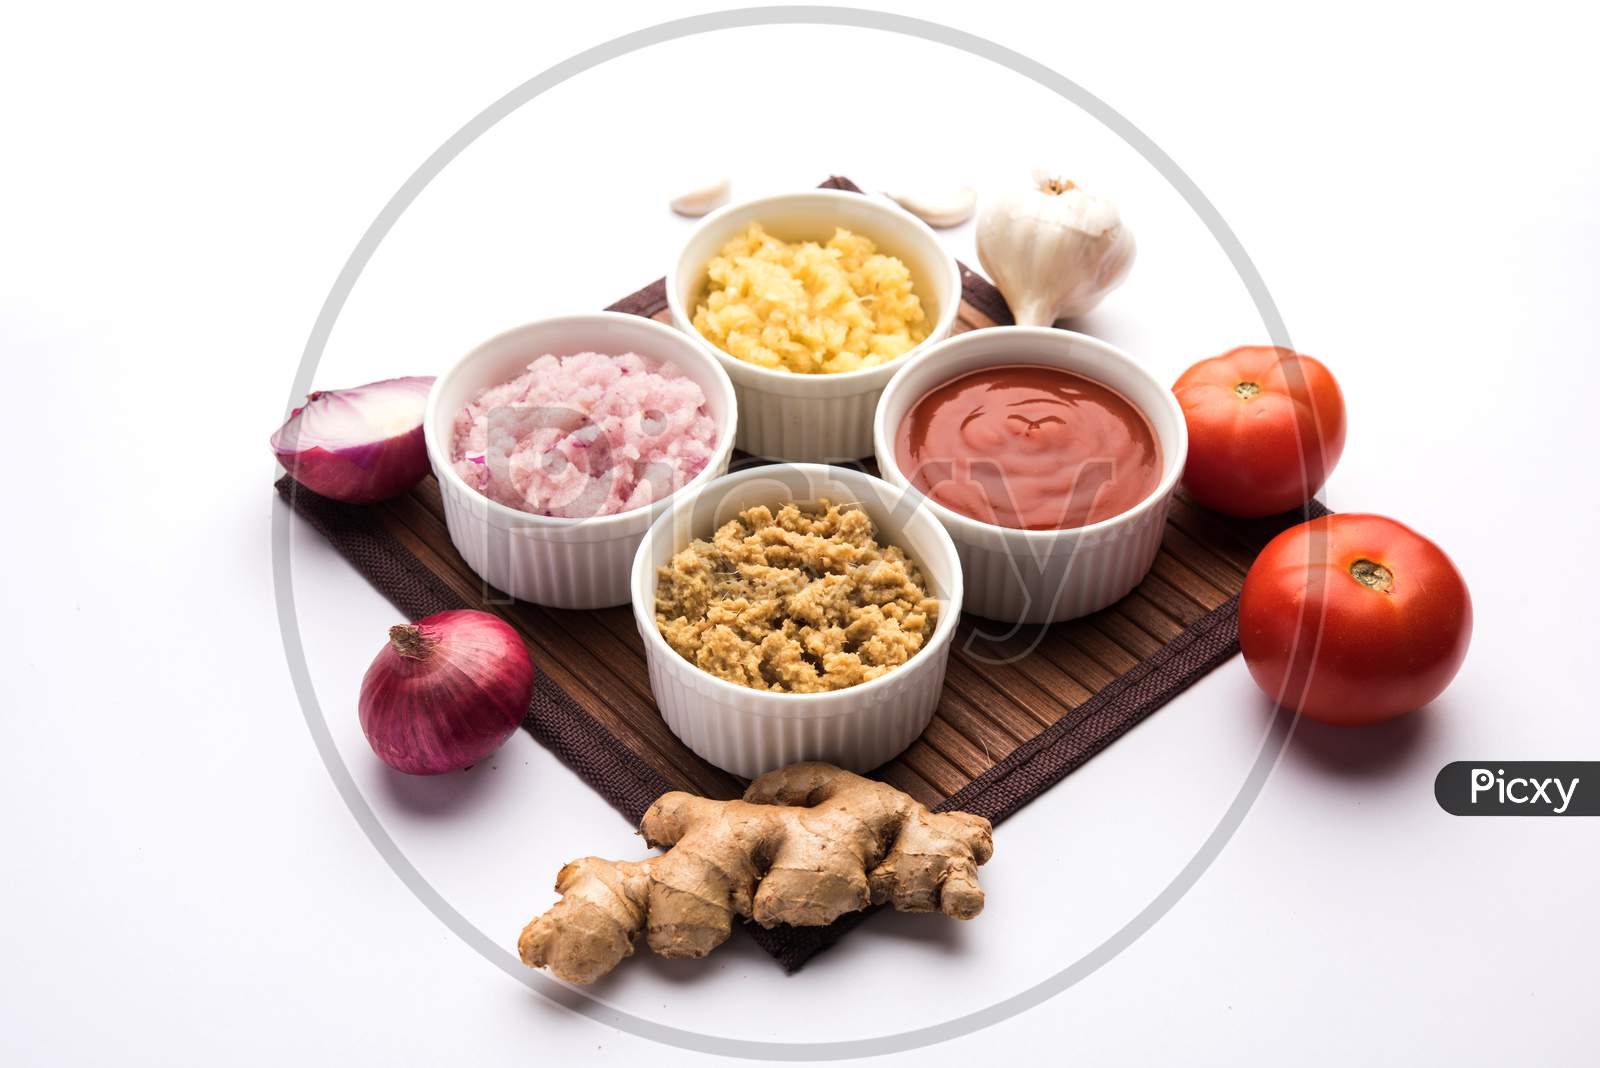 Ginger, Garlic, onion and tomato paste and powder in and raw form. Group of Basic Indian food ingredients over wooden background